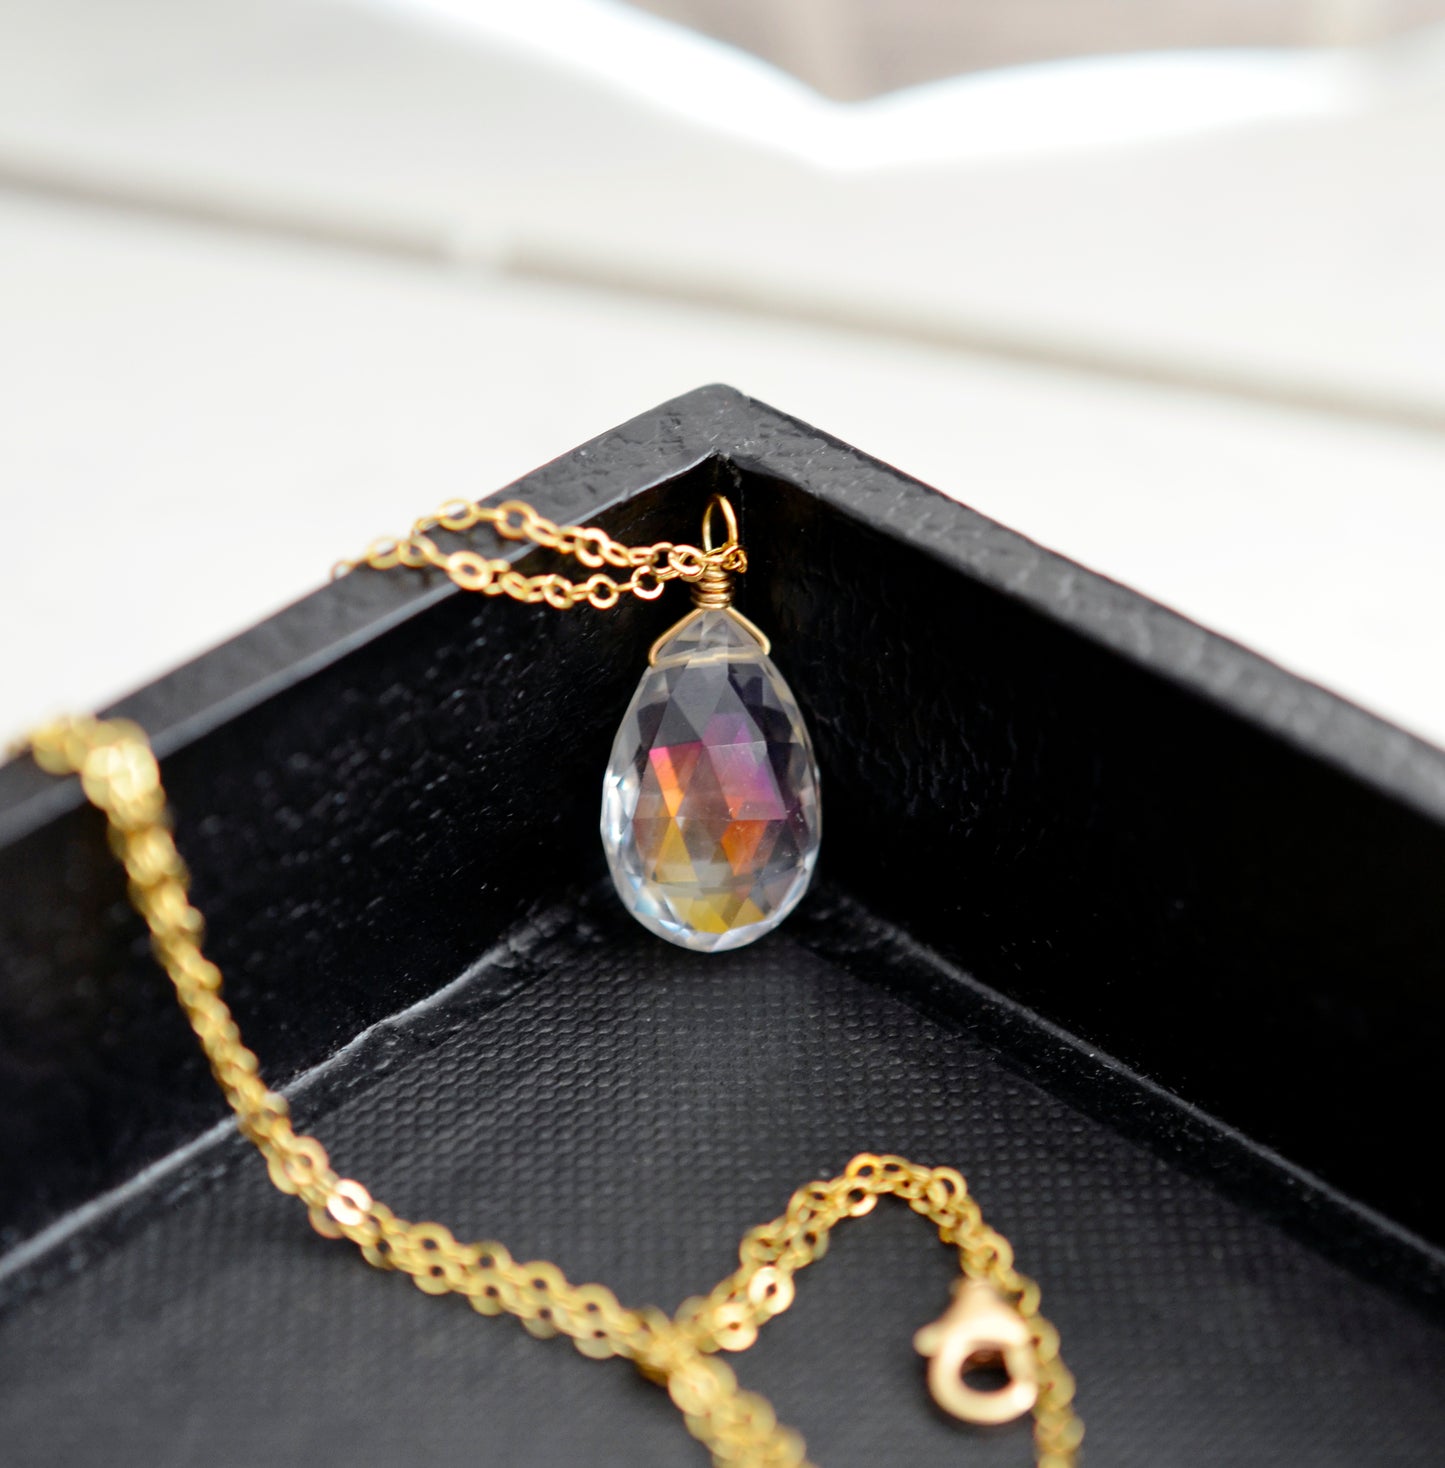 Rainbow Mystic Topaz Necklace - Sterling Silver or Gold Filled